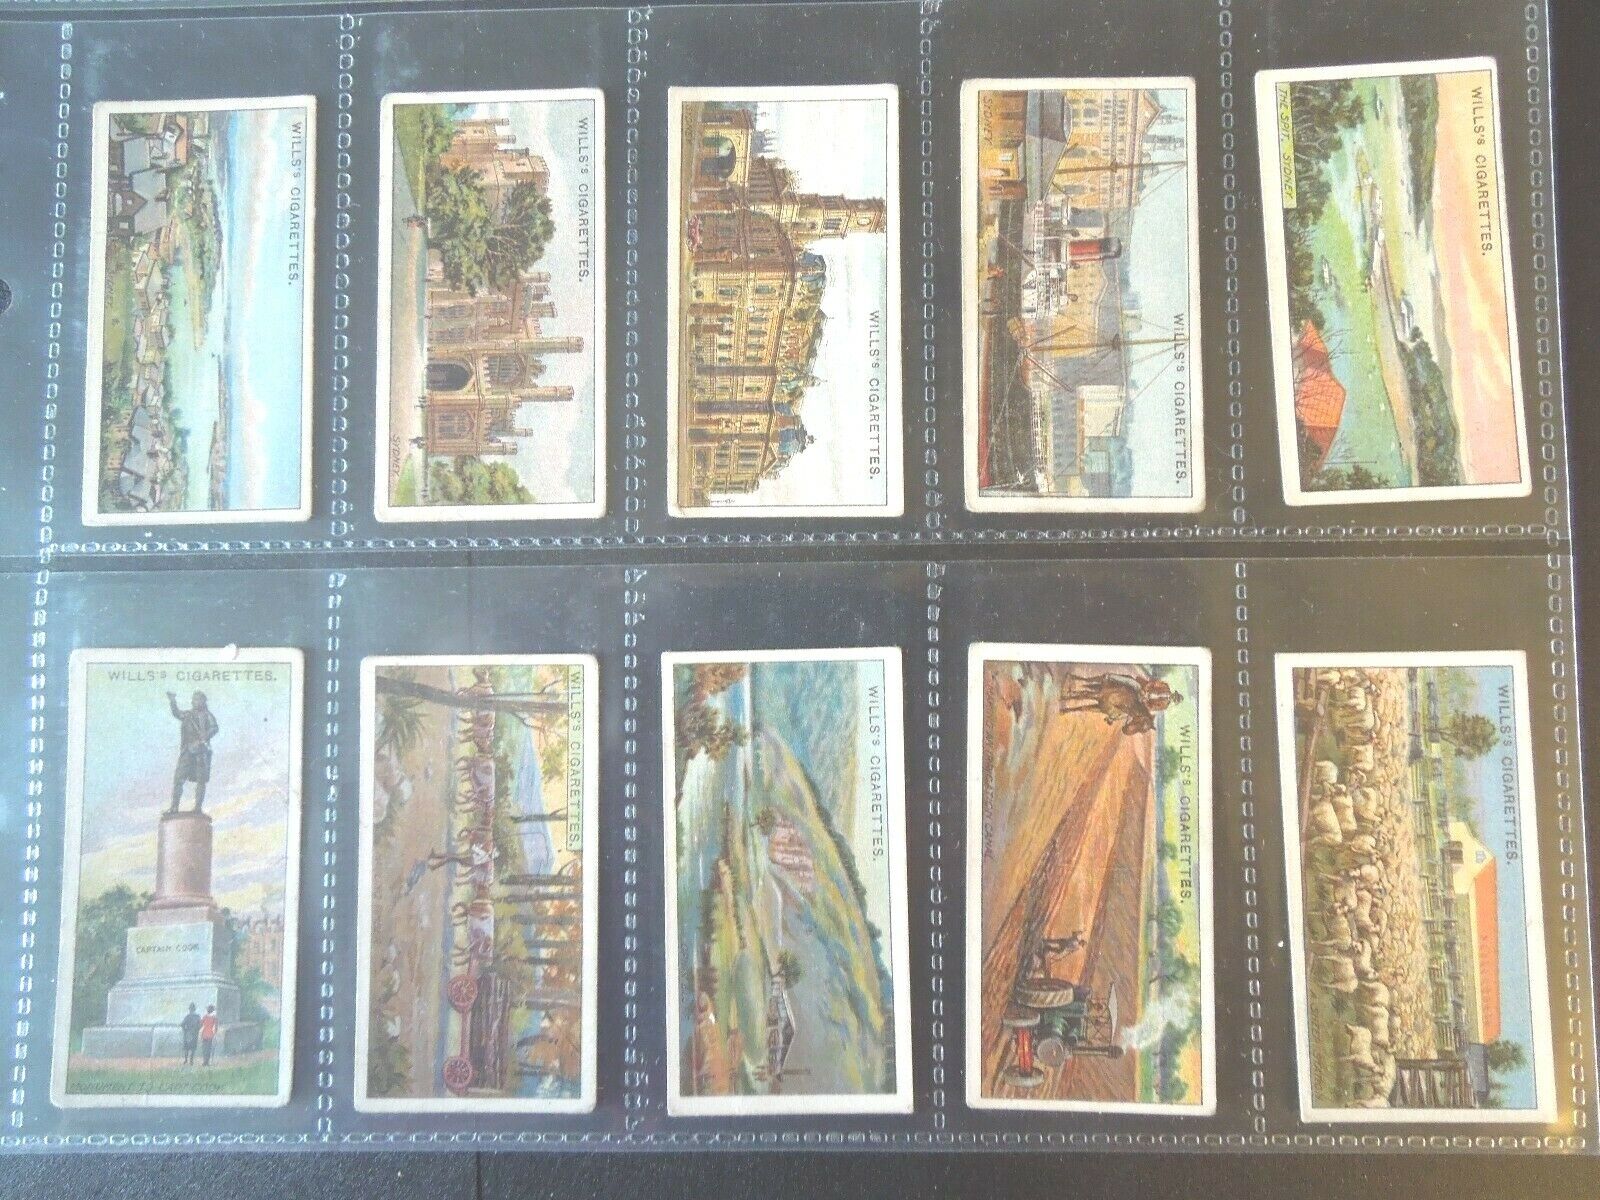 1915 Wills OVERSEAS DOMINIONS AUSTRALIA  Tobacco cards complete 50 card set  